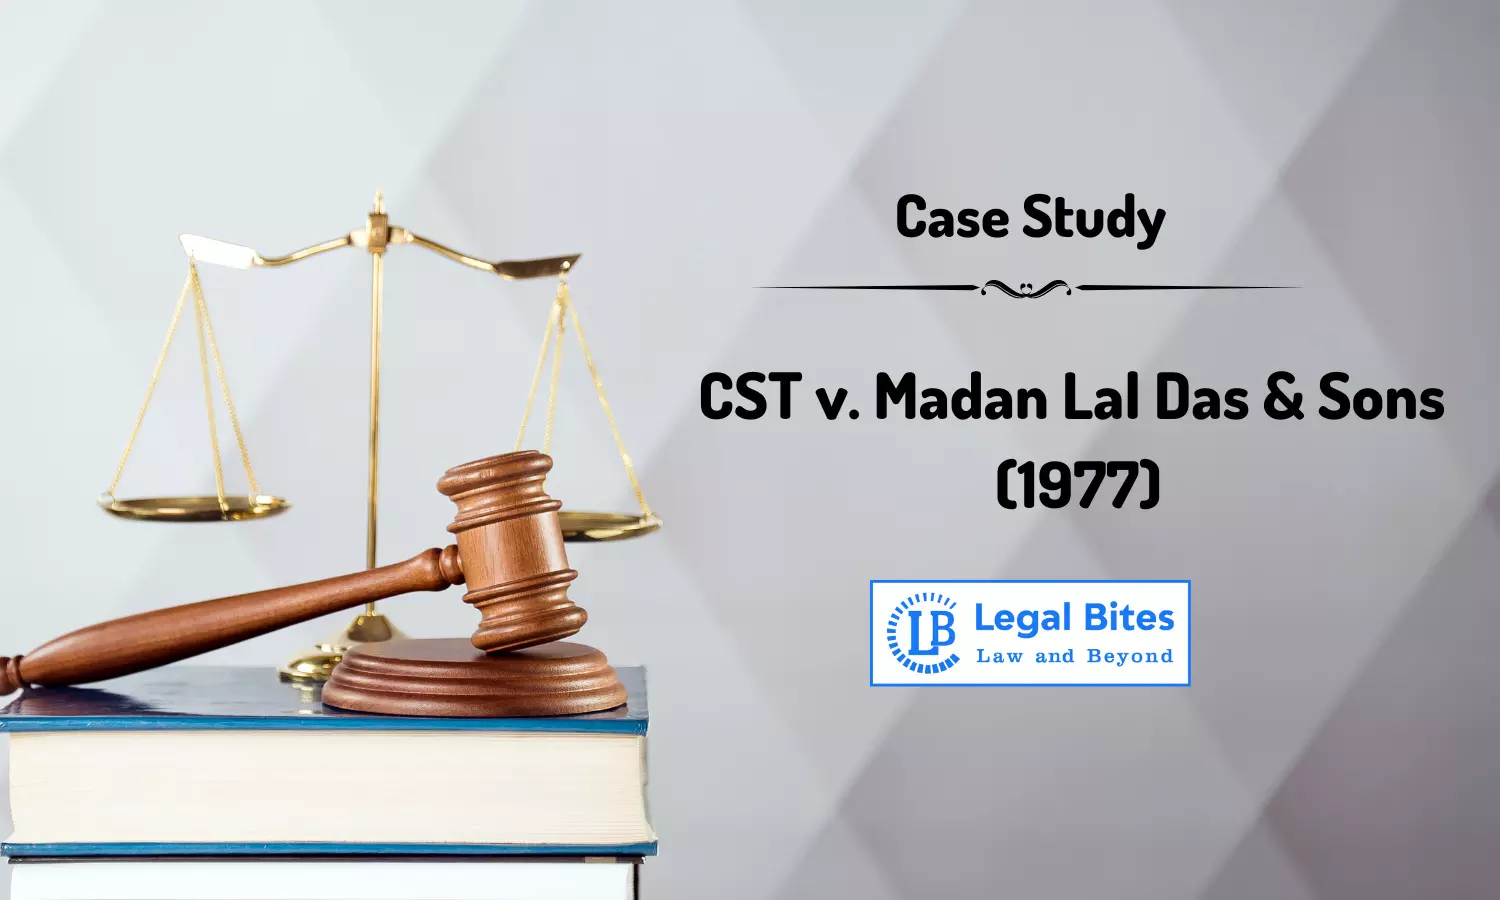 Case Study: The Commissioner of Sales Tax, U.P. v. M/s. Madan Lal Das & Sons, Bareilly (1977) | Section 12 of the Limitation Act, 1963